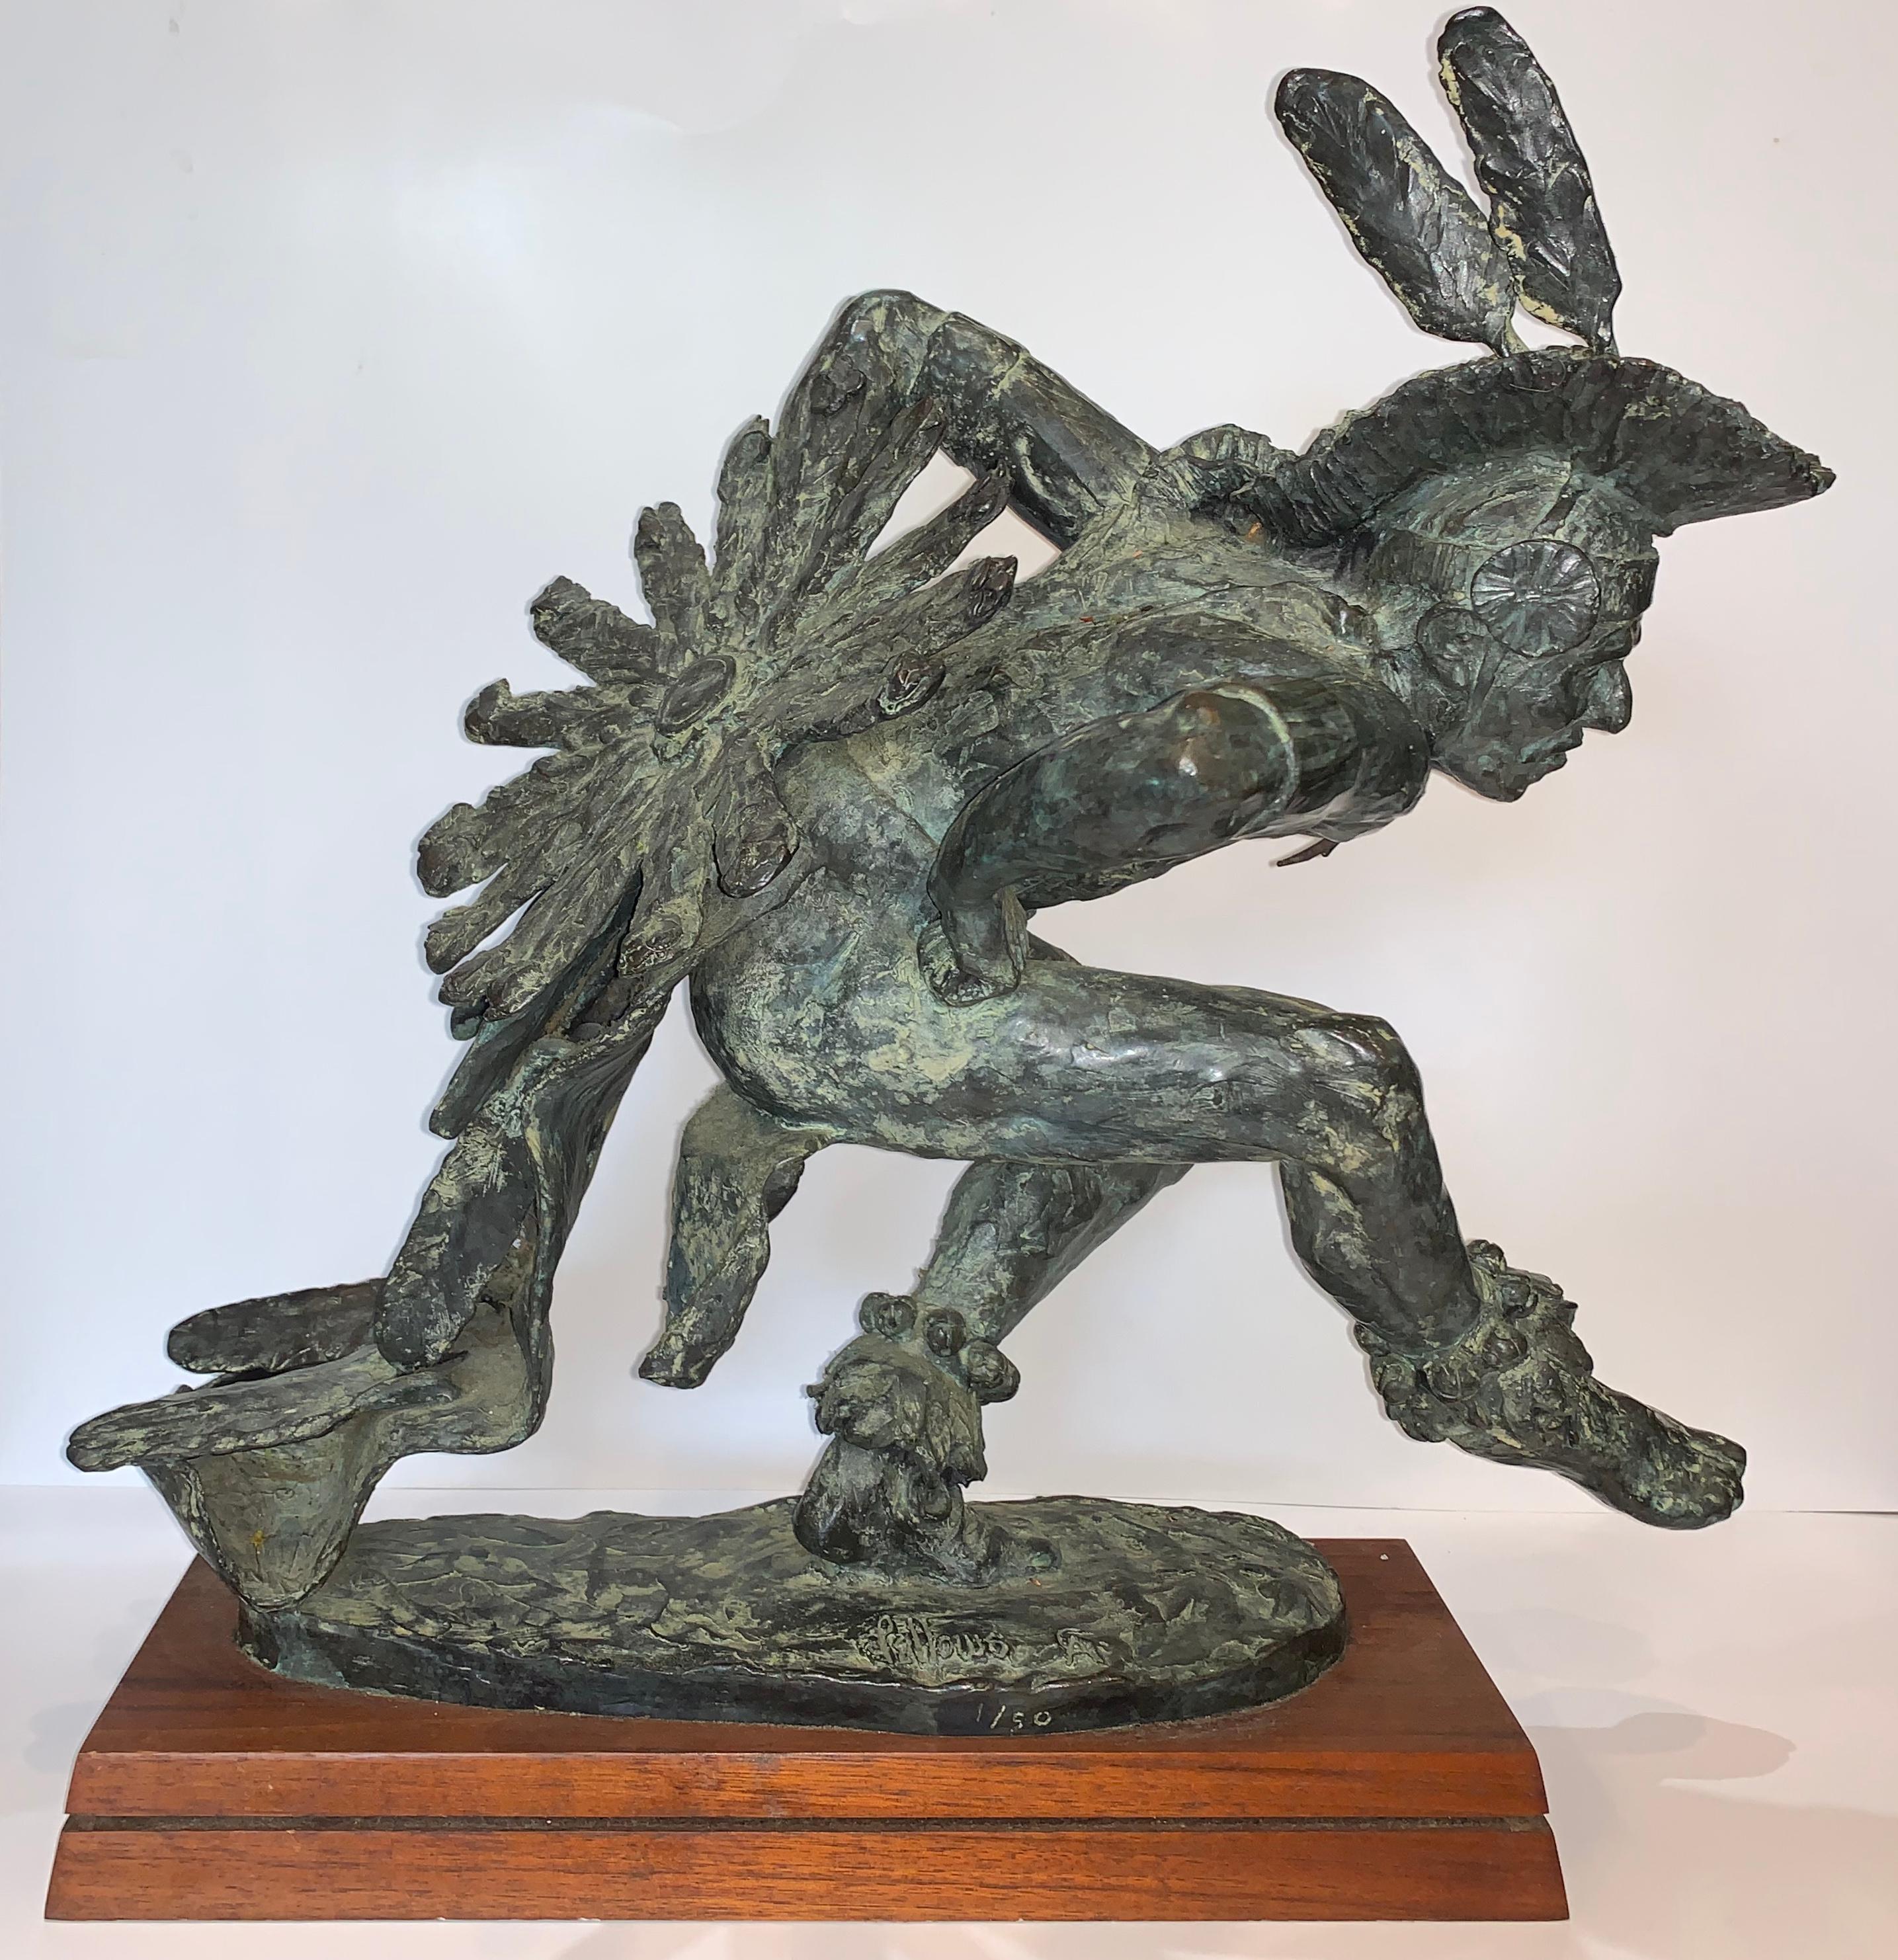 fred fellows Figurative Sculpture - Edition # 1/50  "Dancing Back to Past" American Indian Bronze Chief Dancer